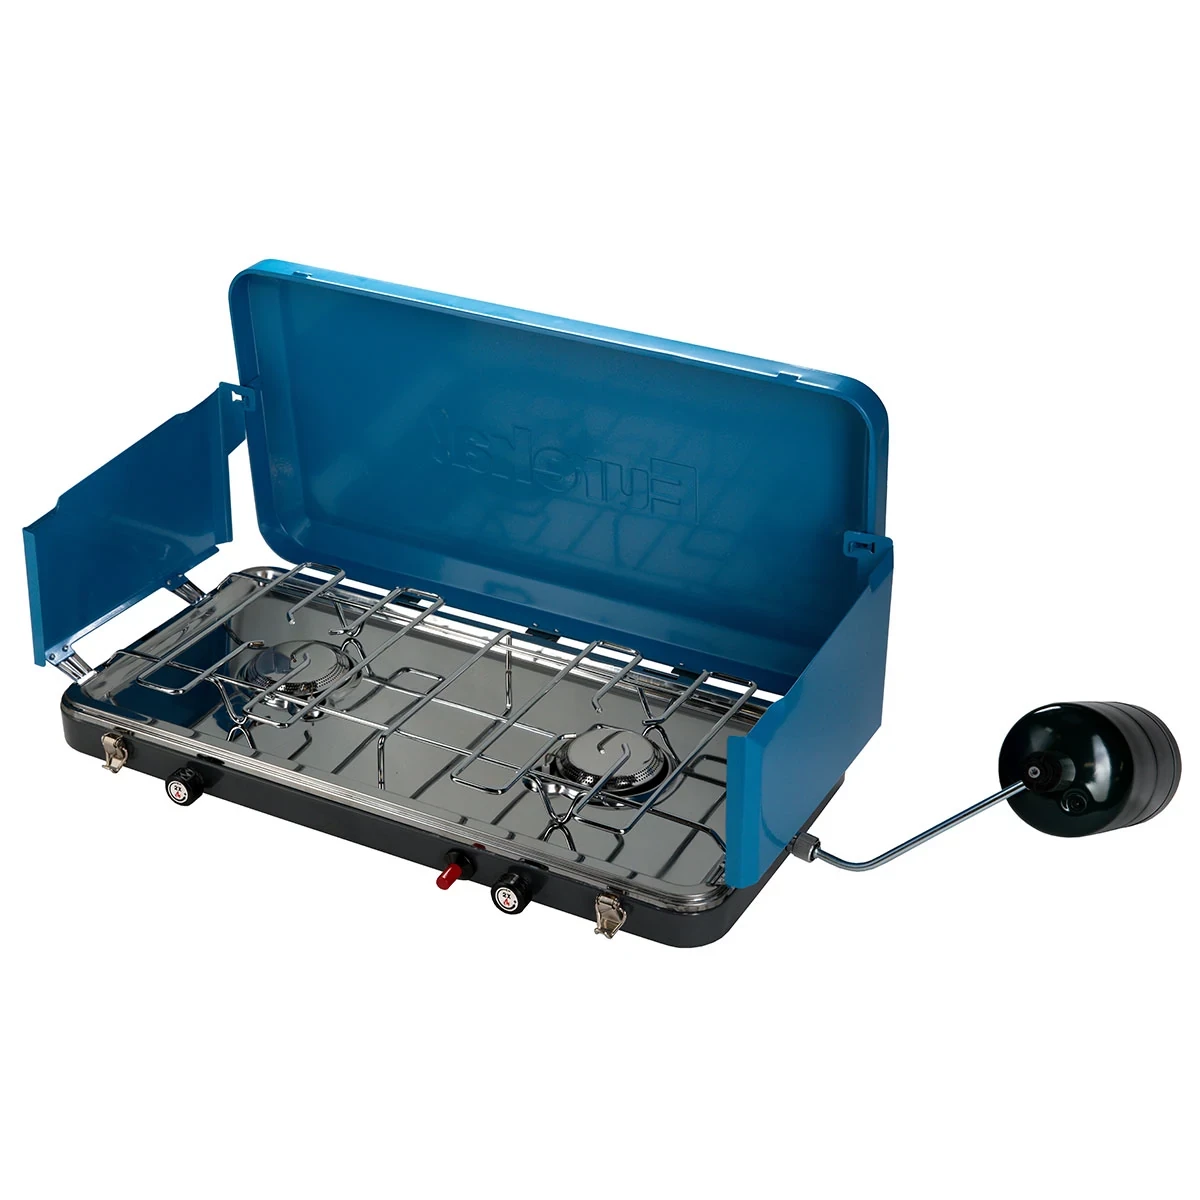 Ignite Plus Camp Stove with fuel attached